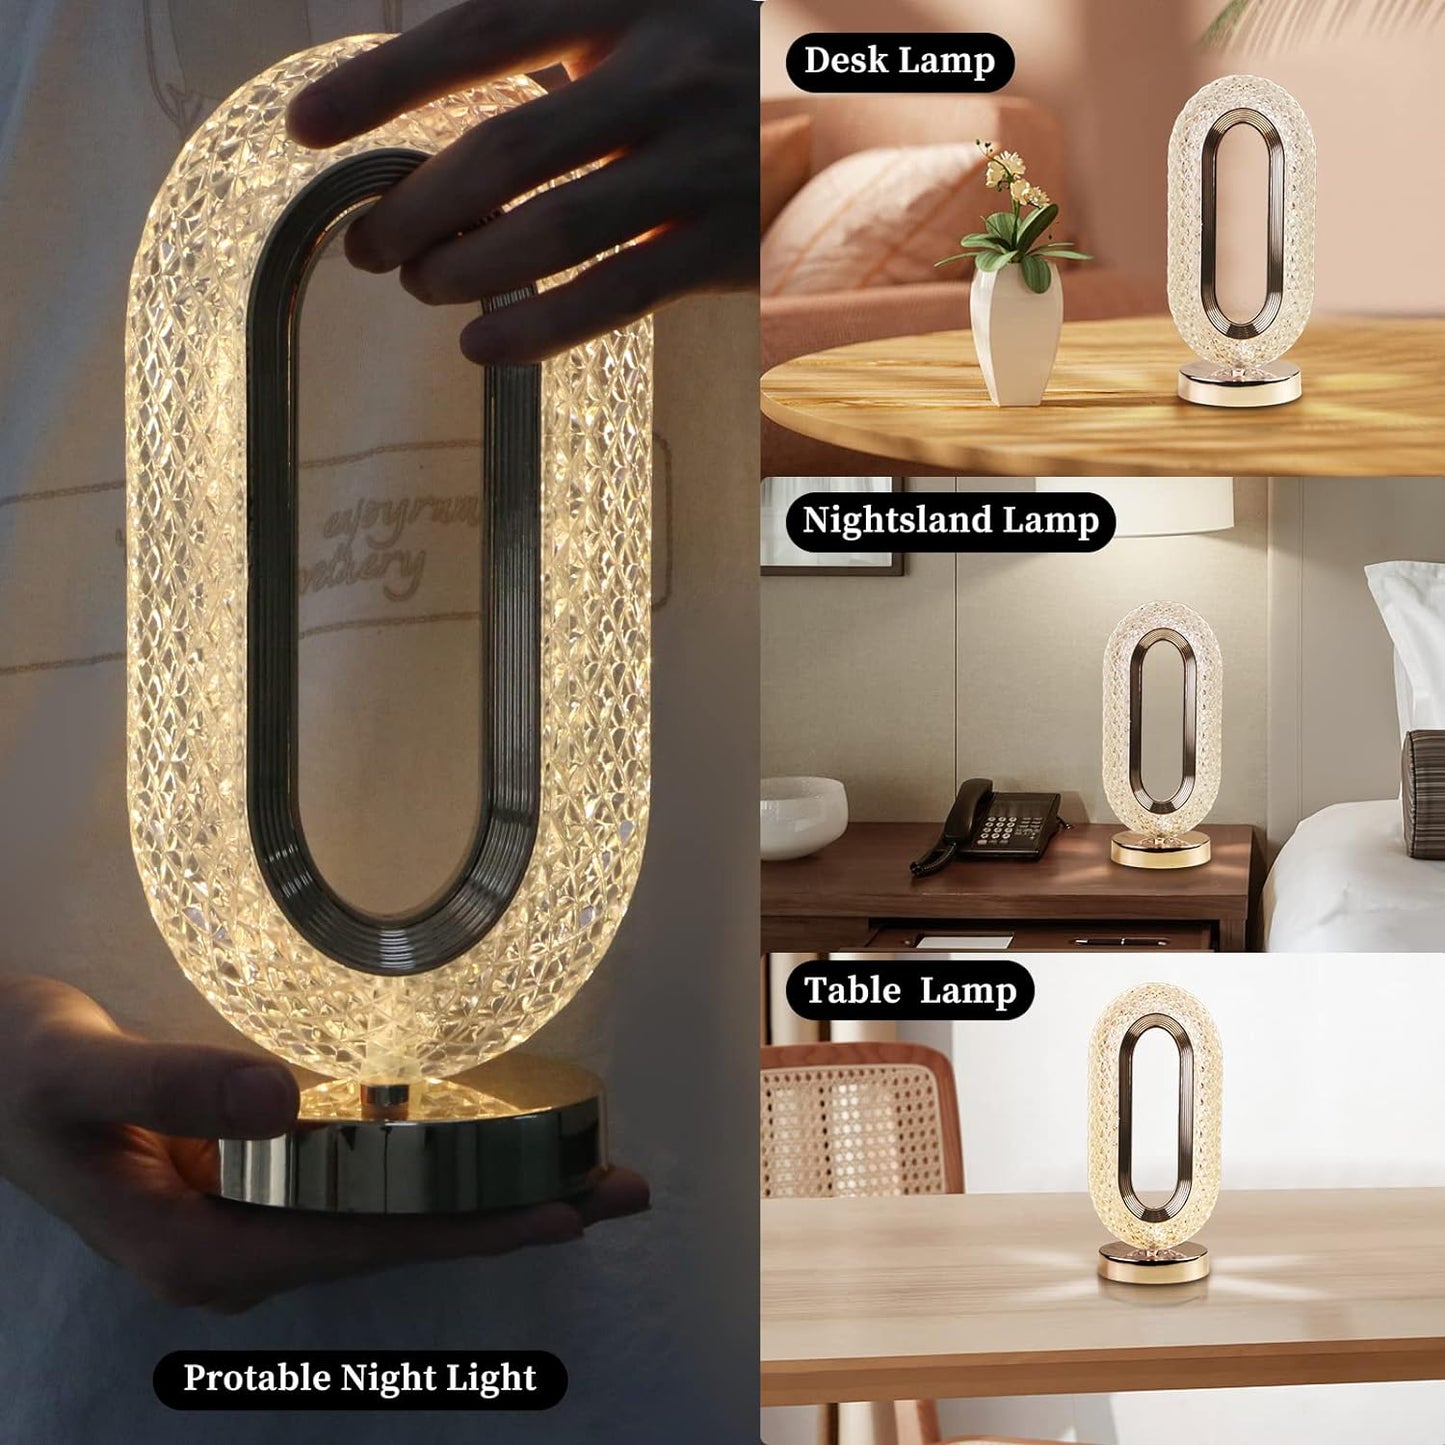 Touch Control Crystal Table Desk Lamp, 3-Way Dimmable Light, USB Rechargeable Crystal Diamond Lamp for Bedroom Living Room, Decorative Desk Lamp